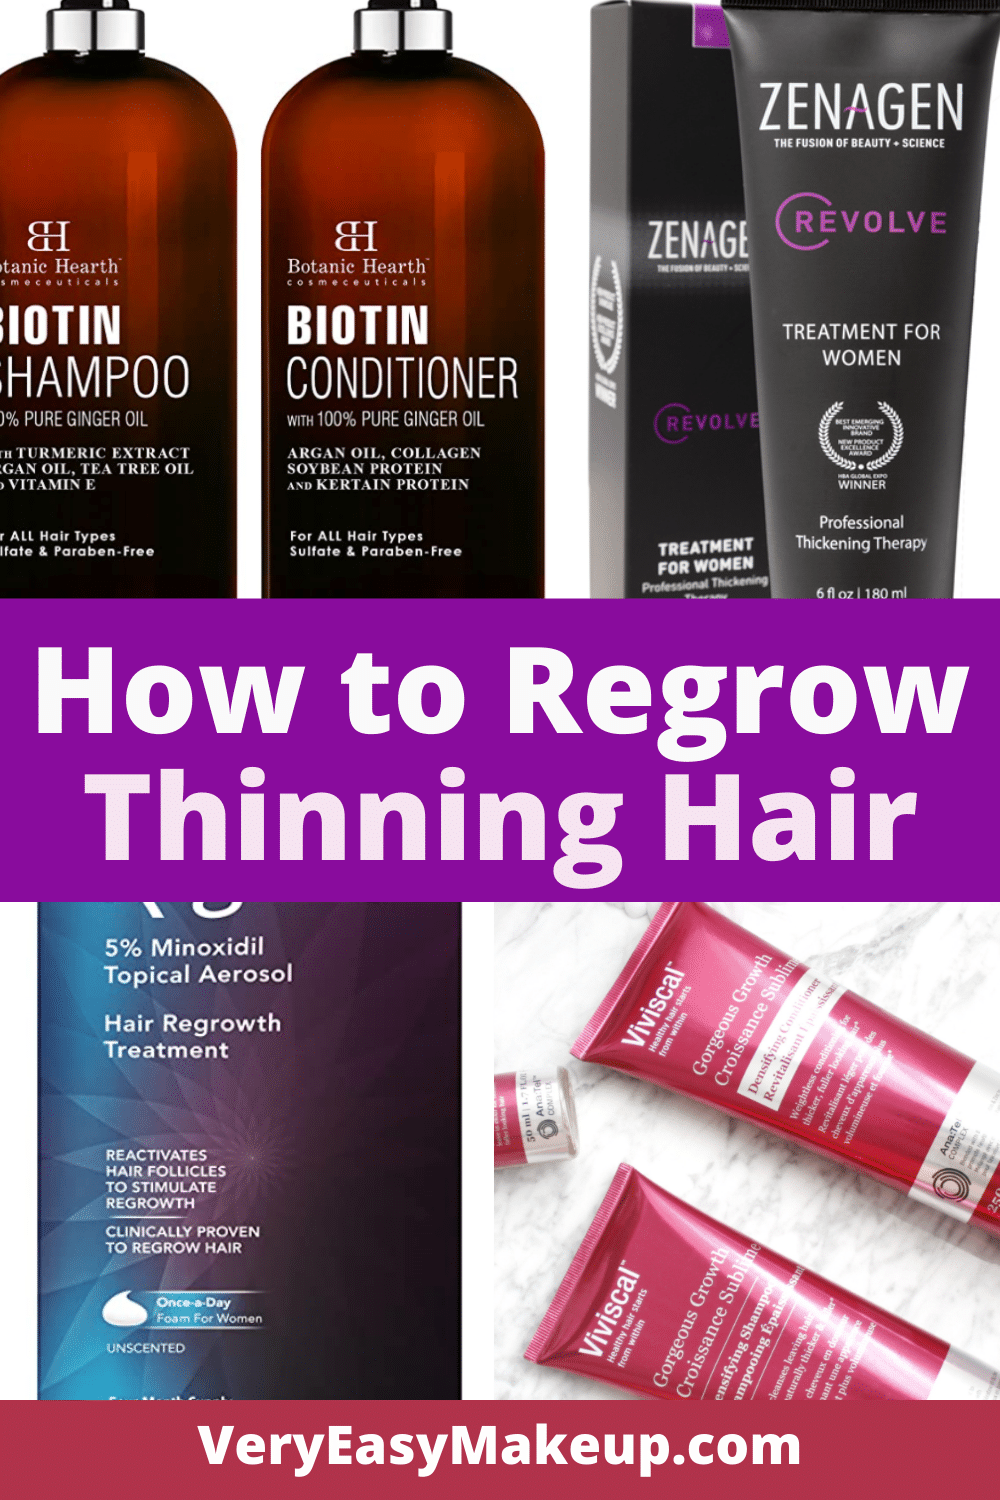 How to Regrow Thinning Hair for females and Get Thick Hair Again naturally